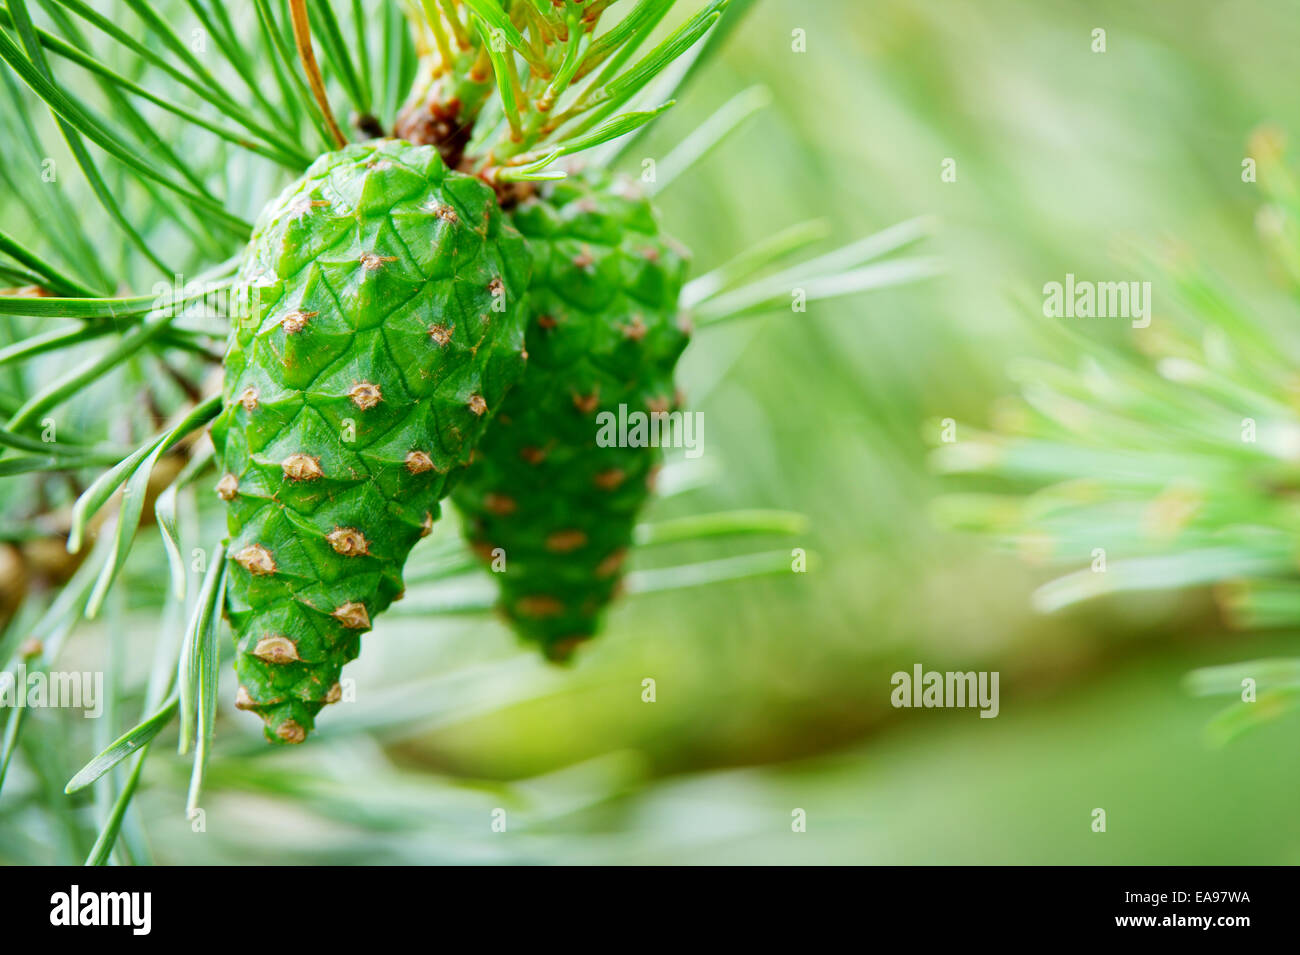 Green scots or scotch pine Pinus sylvestris cones on tree growing in evergreen coniferous forest. Pomerania, Poland. Stock Photo